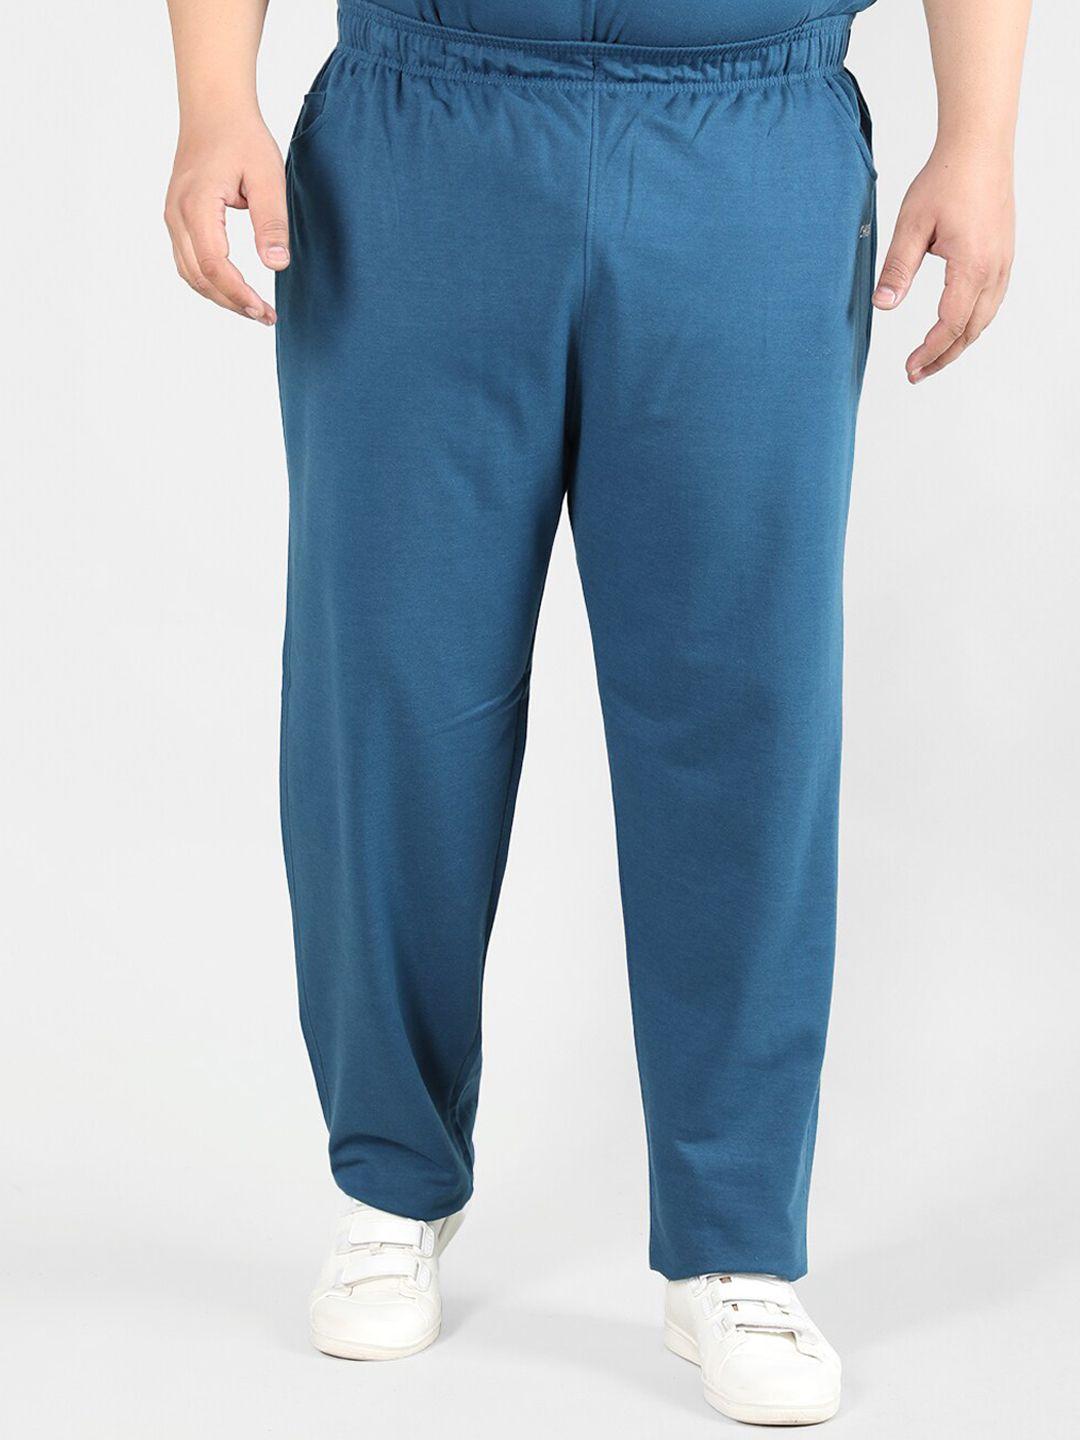 chkokko men plus size  relaxed-fit gym track pants